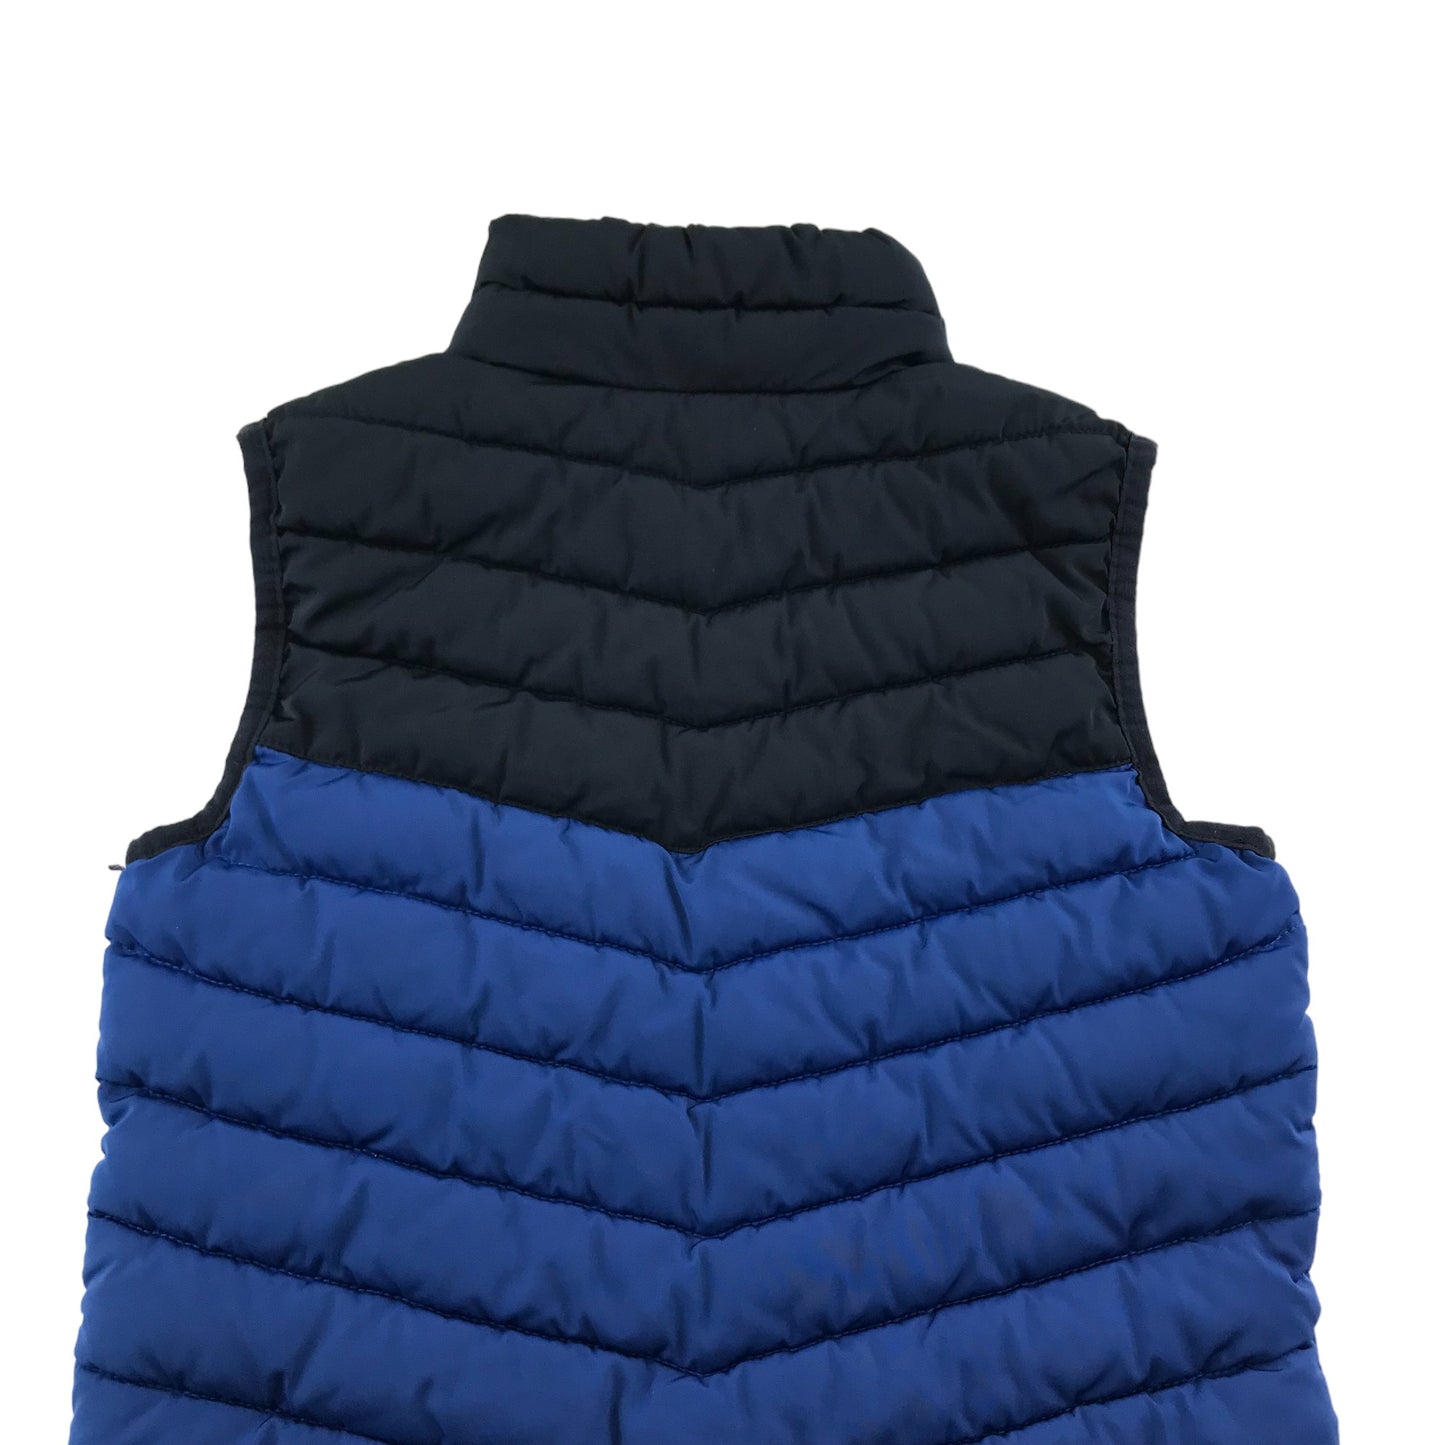 Joules Gilet Age 5 Navy and Blue Light Puffer with full zip and high collar